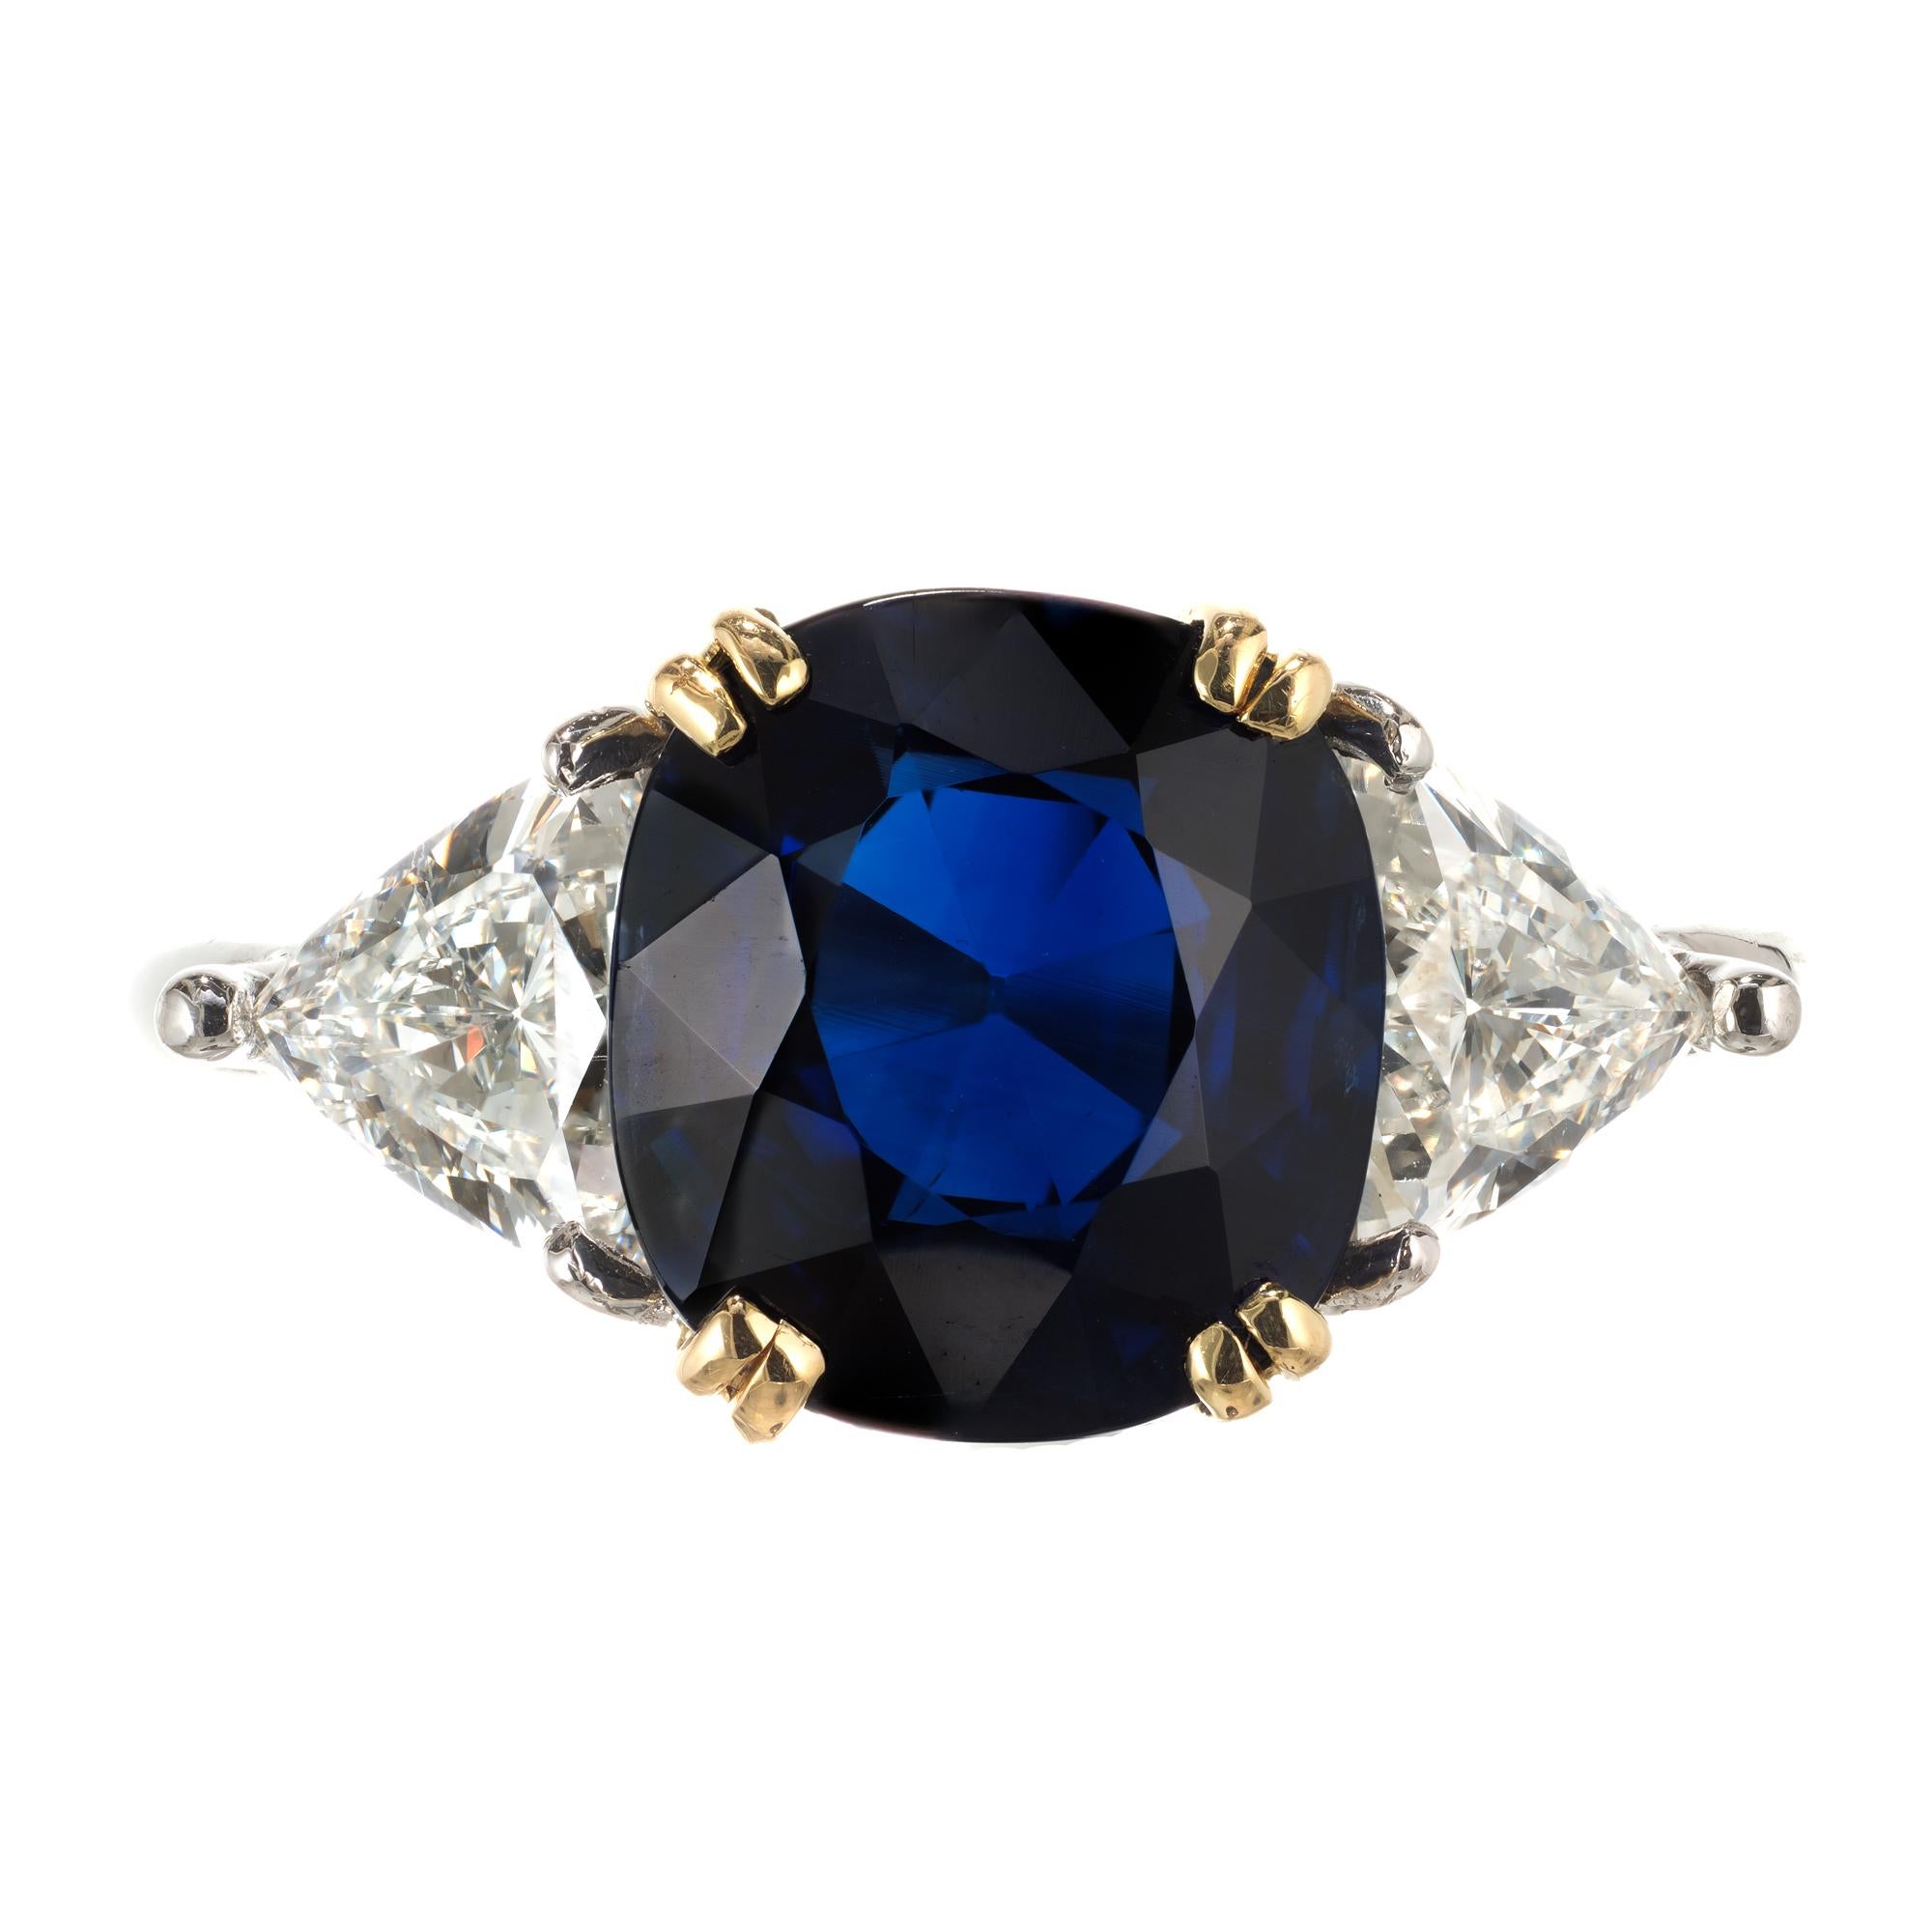 Rich Royal deep blue natural no heat Sapphire engagement ring in original handmade Platinum ring with 18k yellow gold center and bright white trilliant diamonds.

1 cushion Royal Blue Sapphire, approx. total weight 4.14cts, no heat, AGL certificate